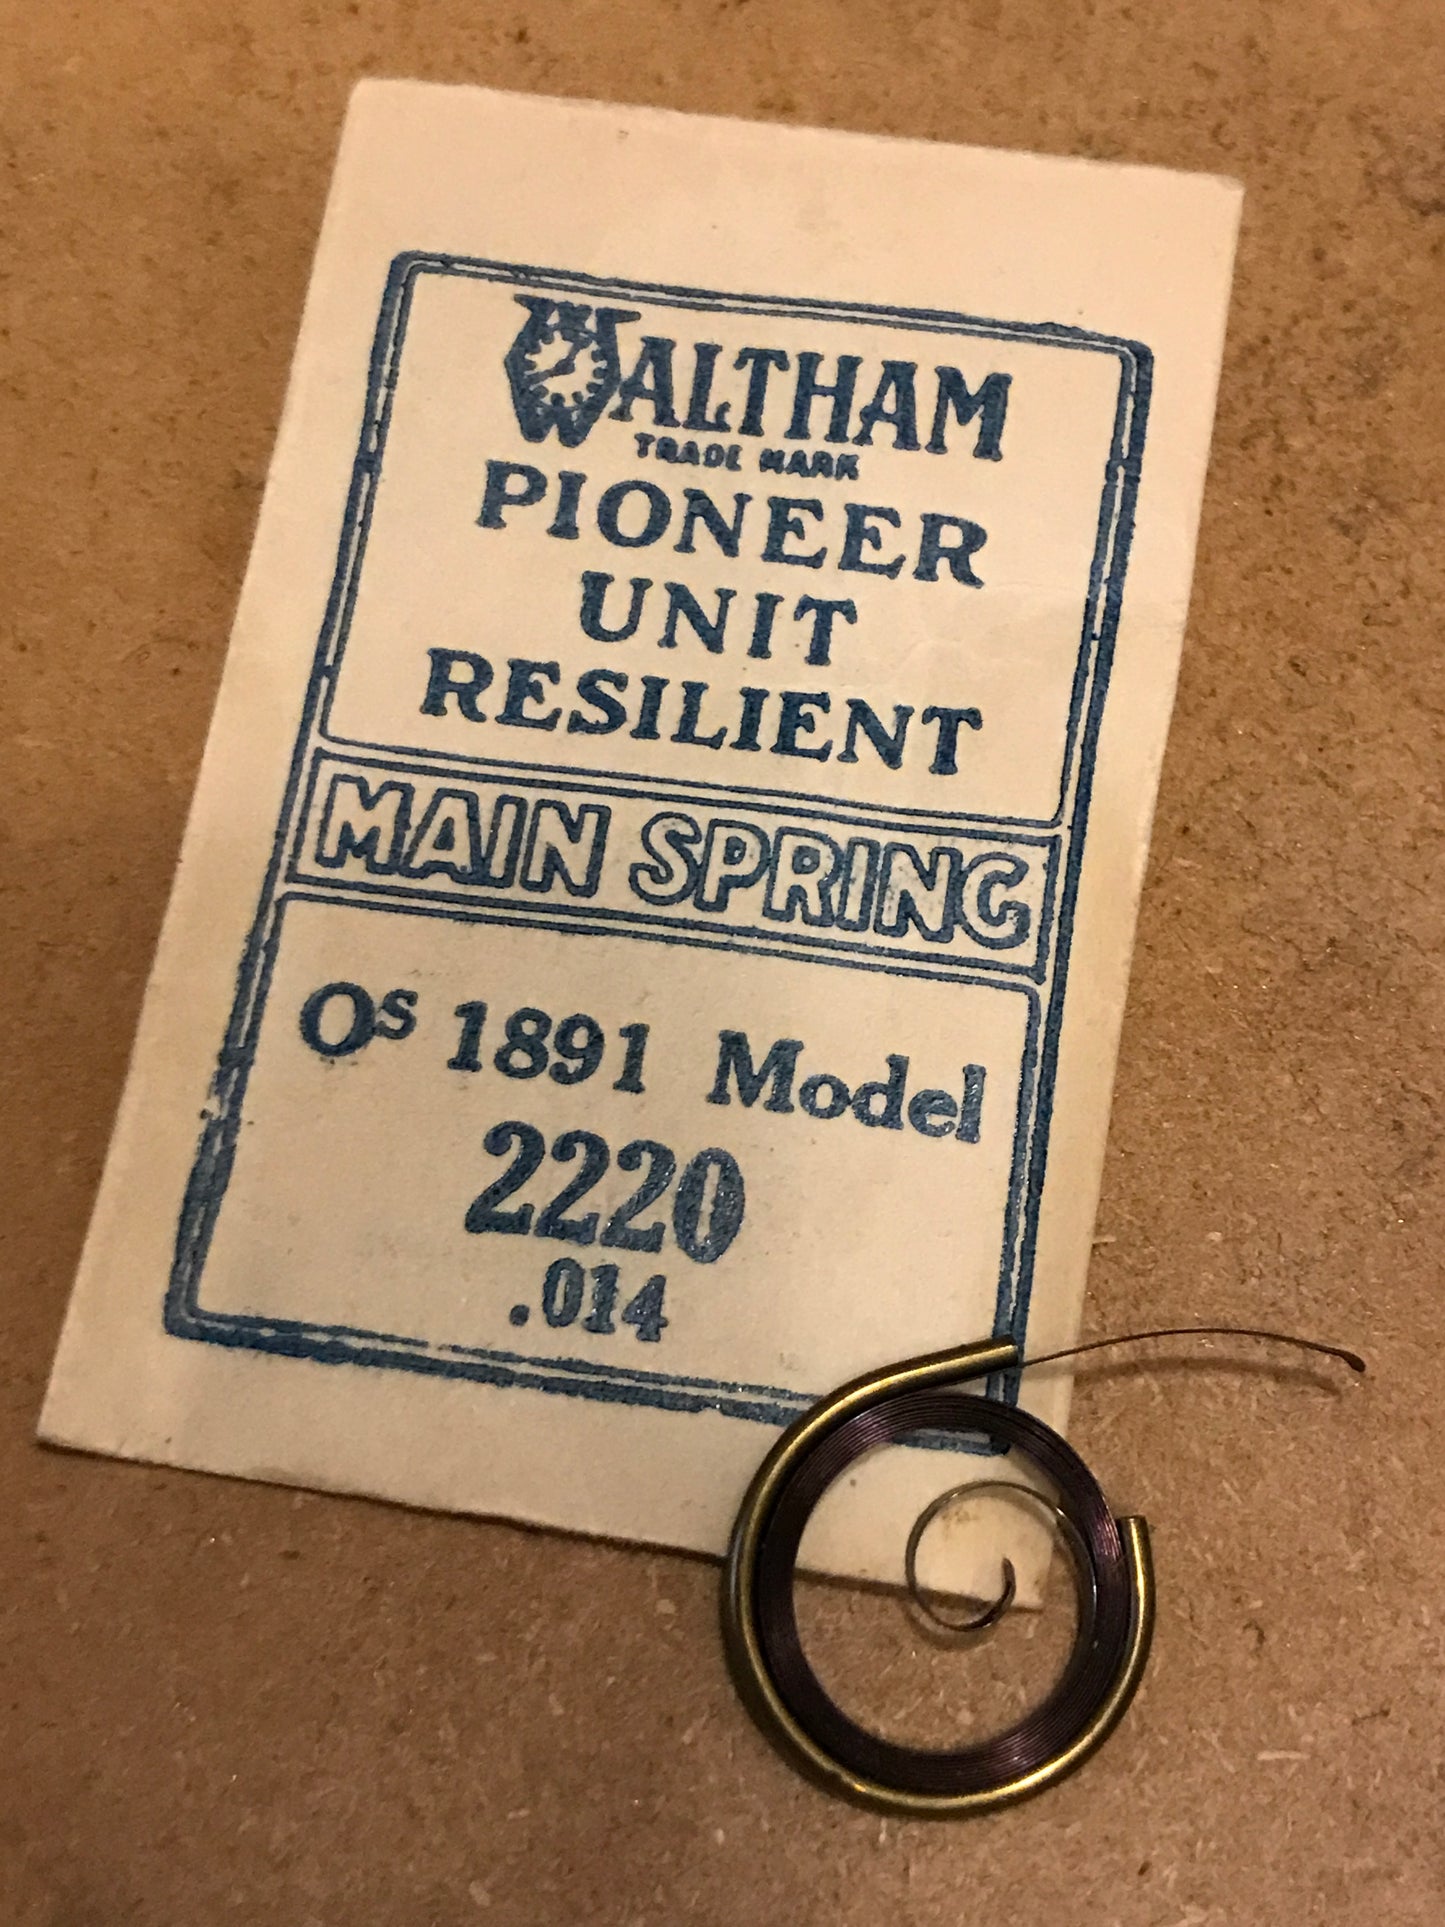 Waltham Factory Mainspring for 0s 1891 Model No. 2220 - Steel